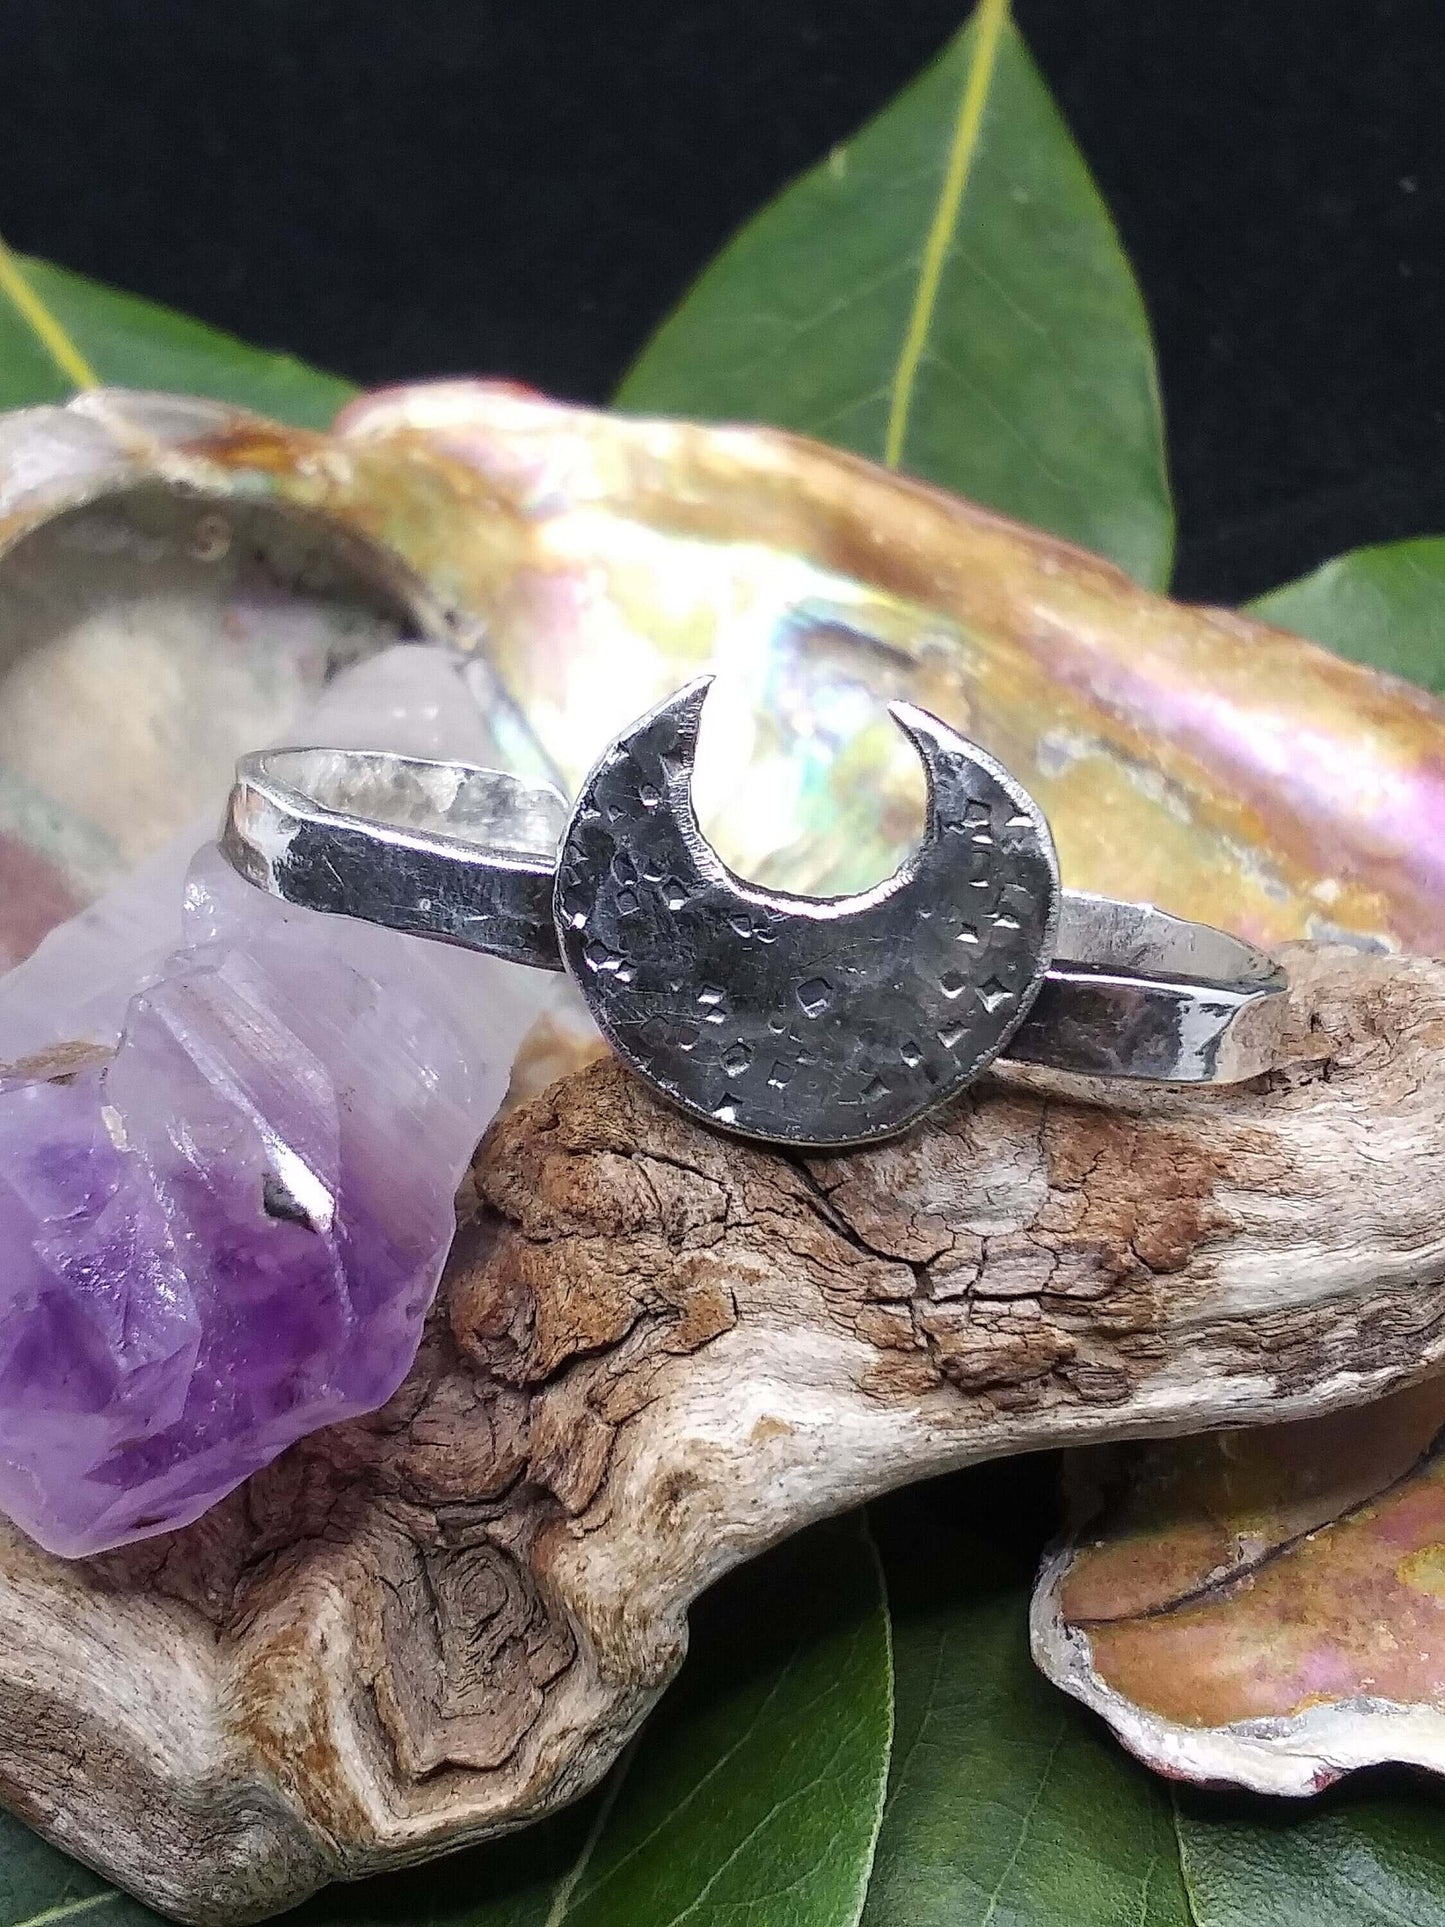 A silver double ring with a crescent moon that has hammered texturing rested on an abalone shell piece beside an amethyst crystal.